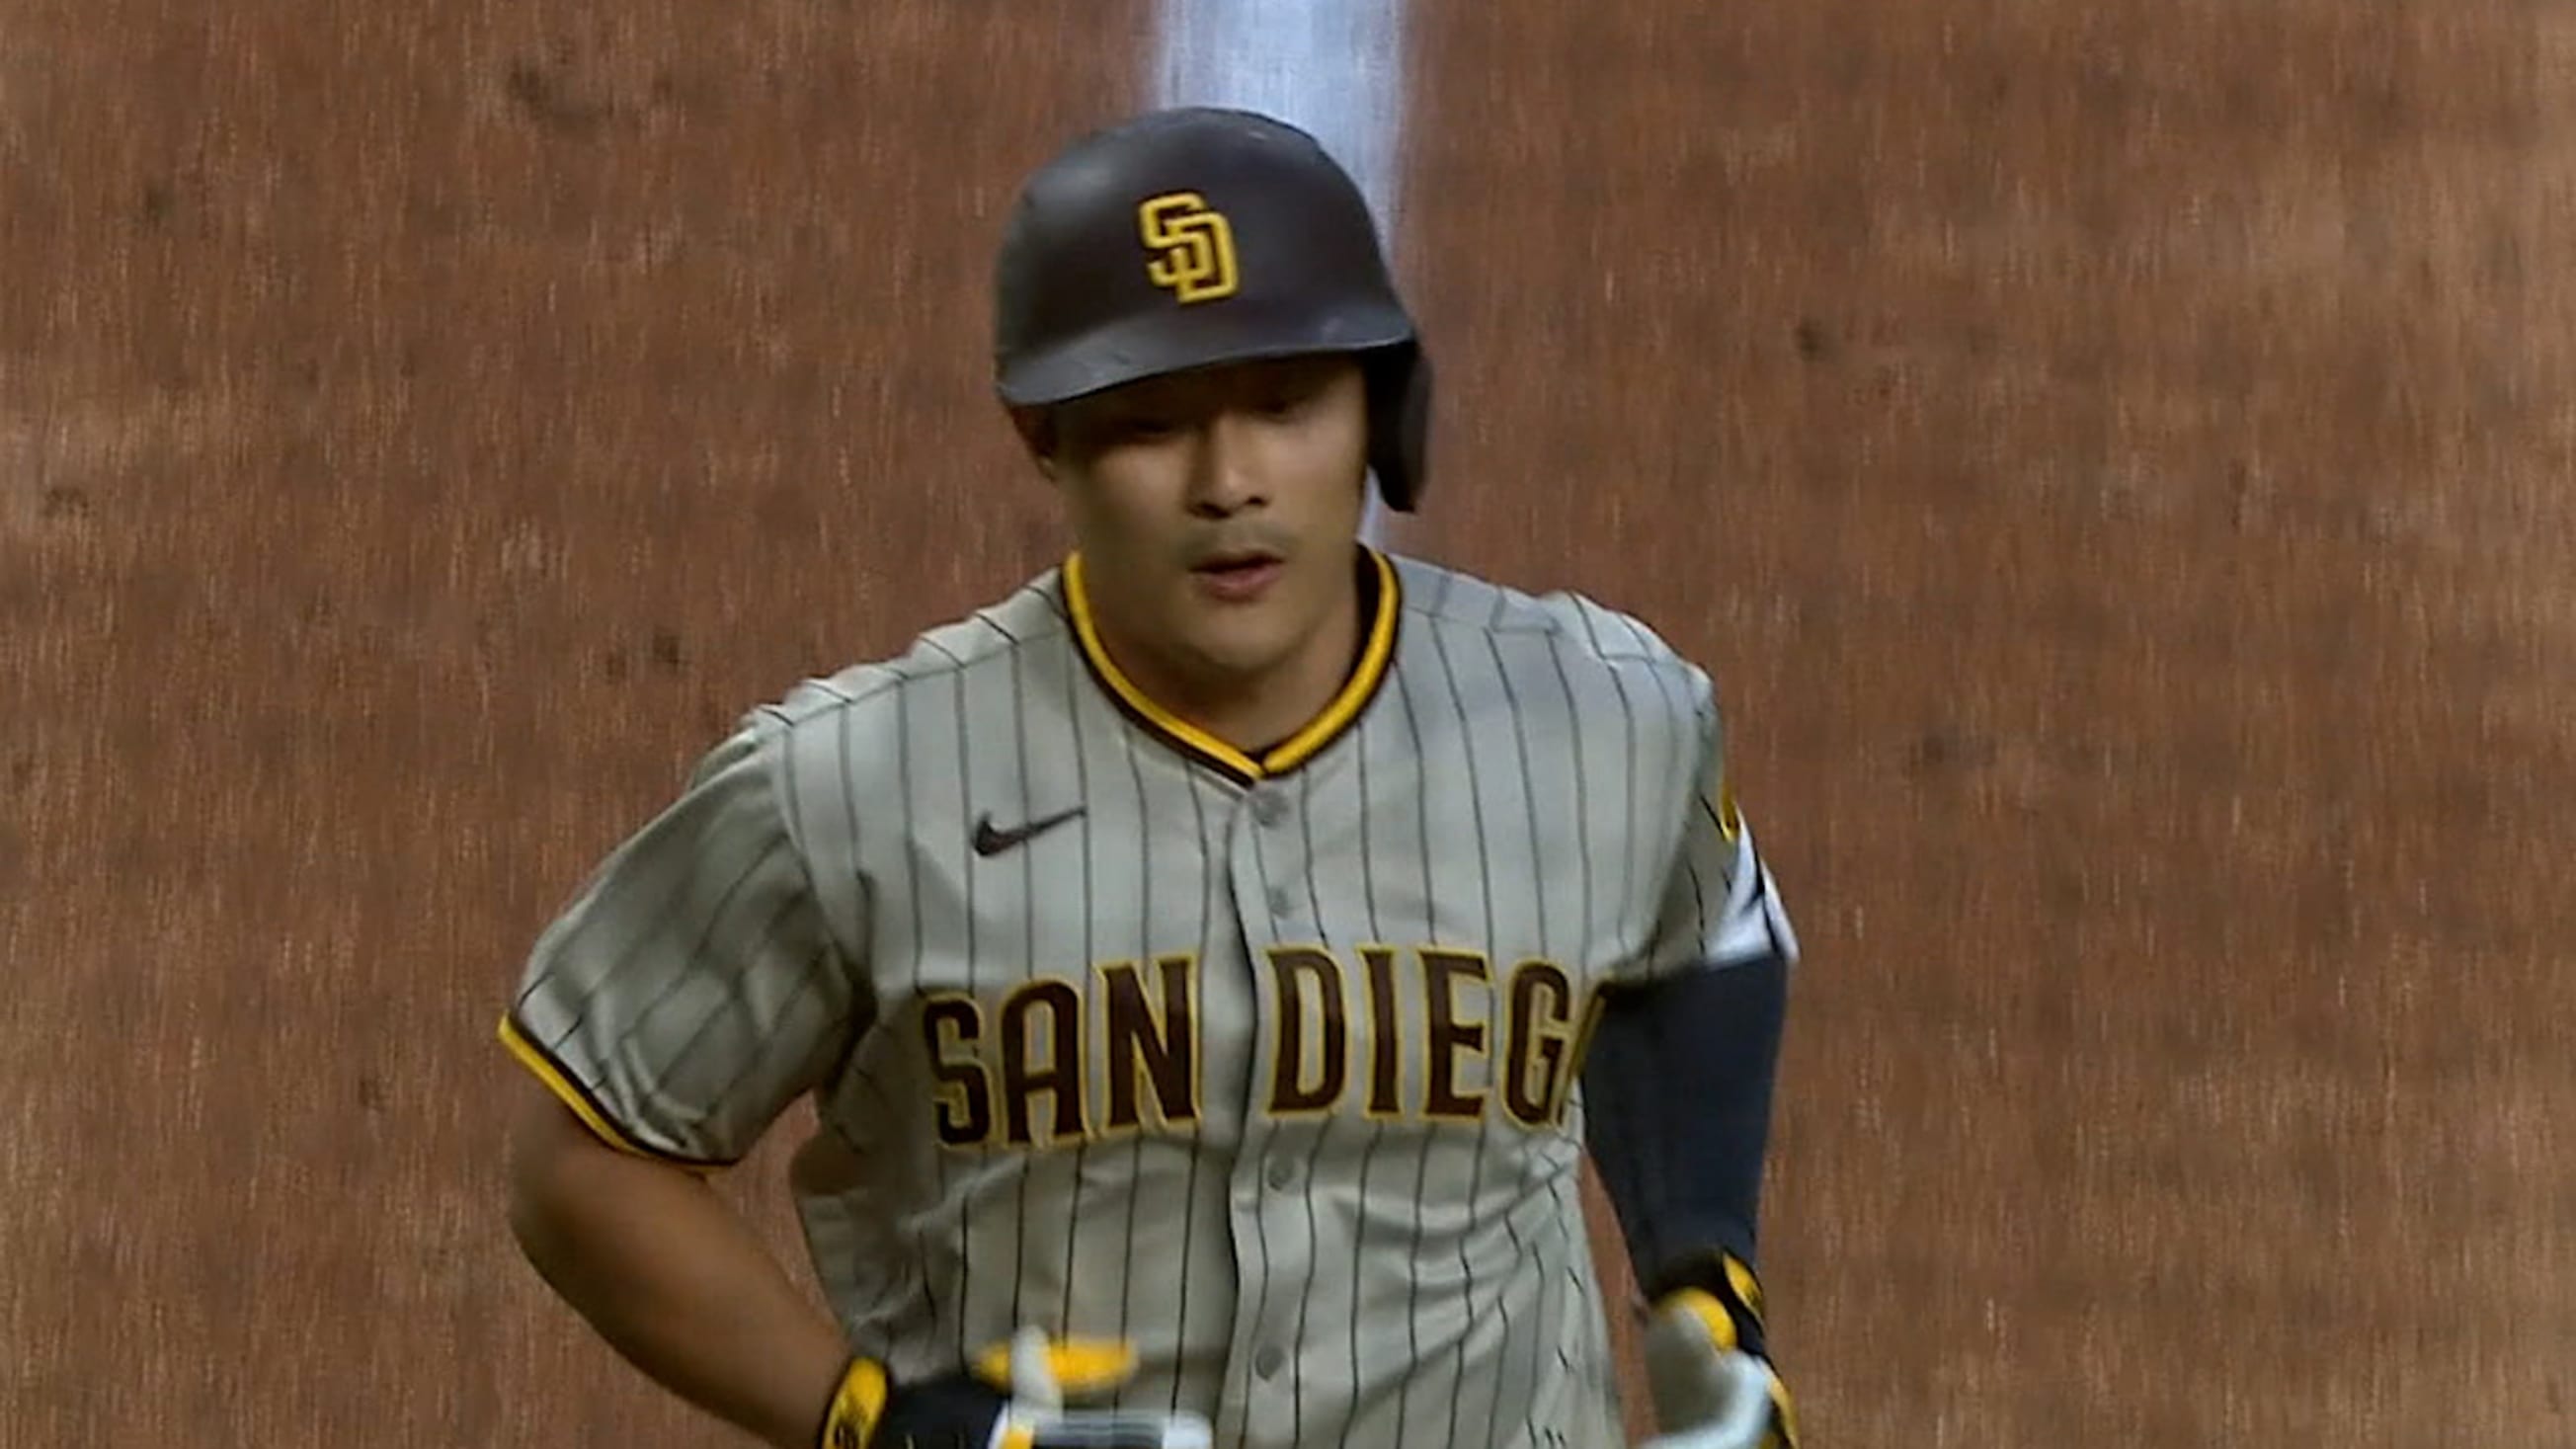 First look at Ha-Seong Kim in the home pinstripes. 🔥